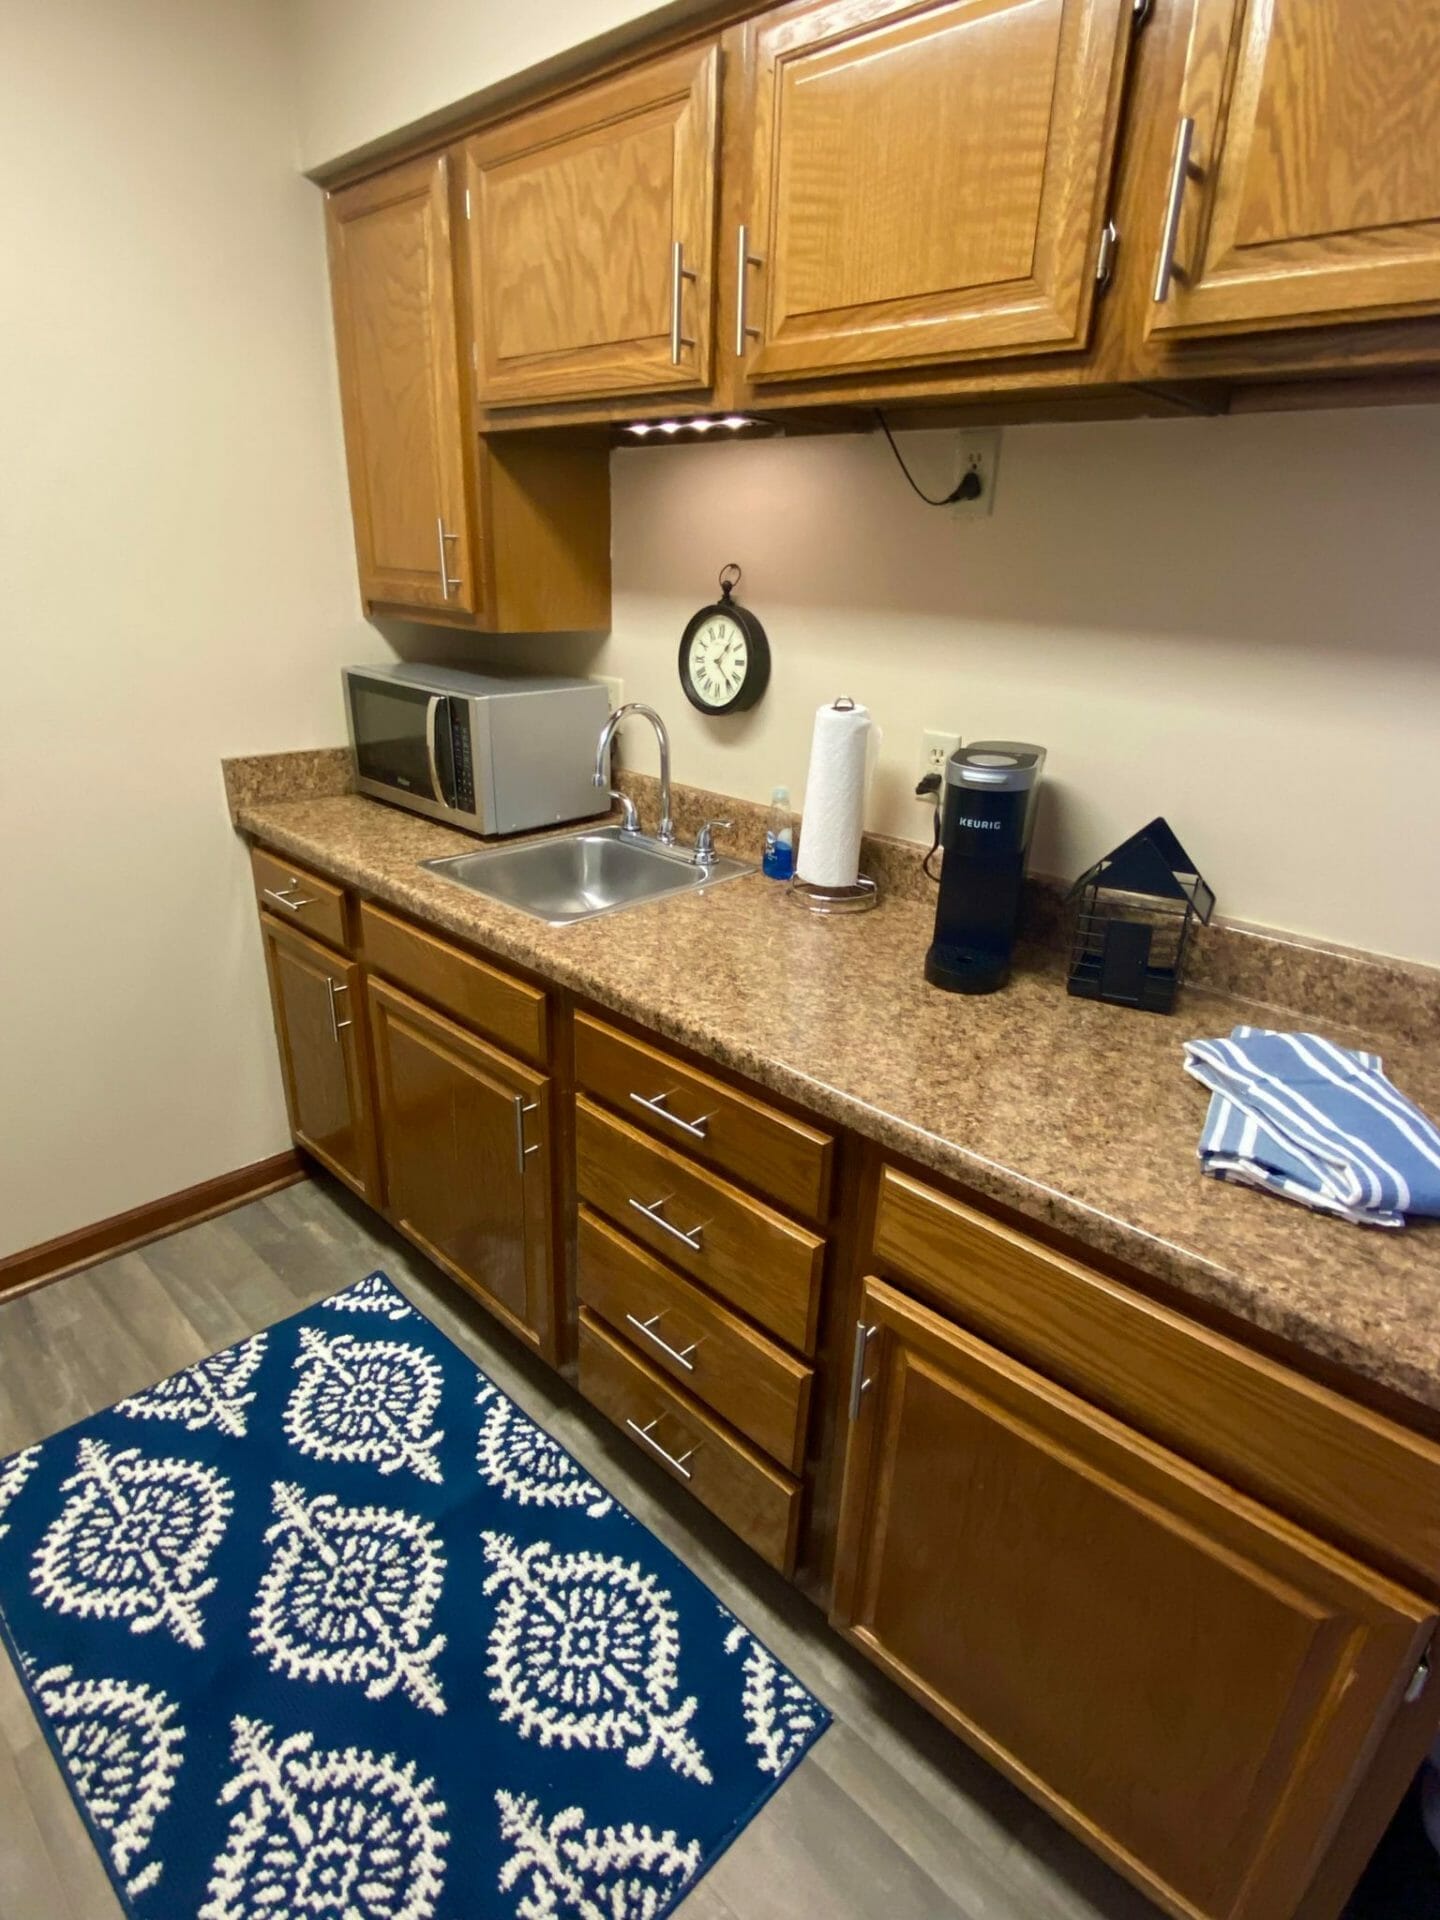 <span  class="uc_style_uc_tiles_grid_image_elementor_uc_items_attribute_title" style="color:#000000;">The kitchenette interior at American Village respite care. </span>